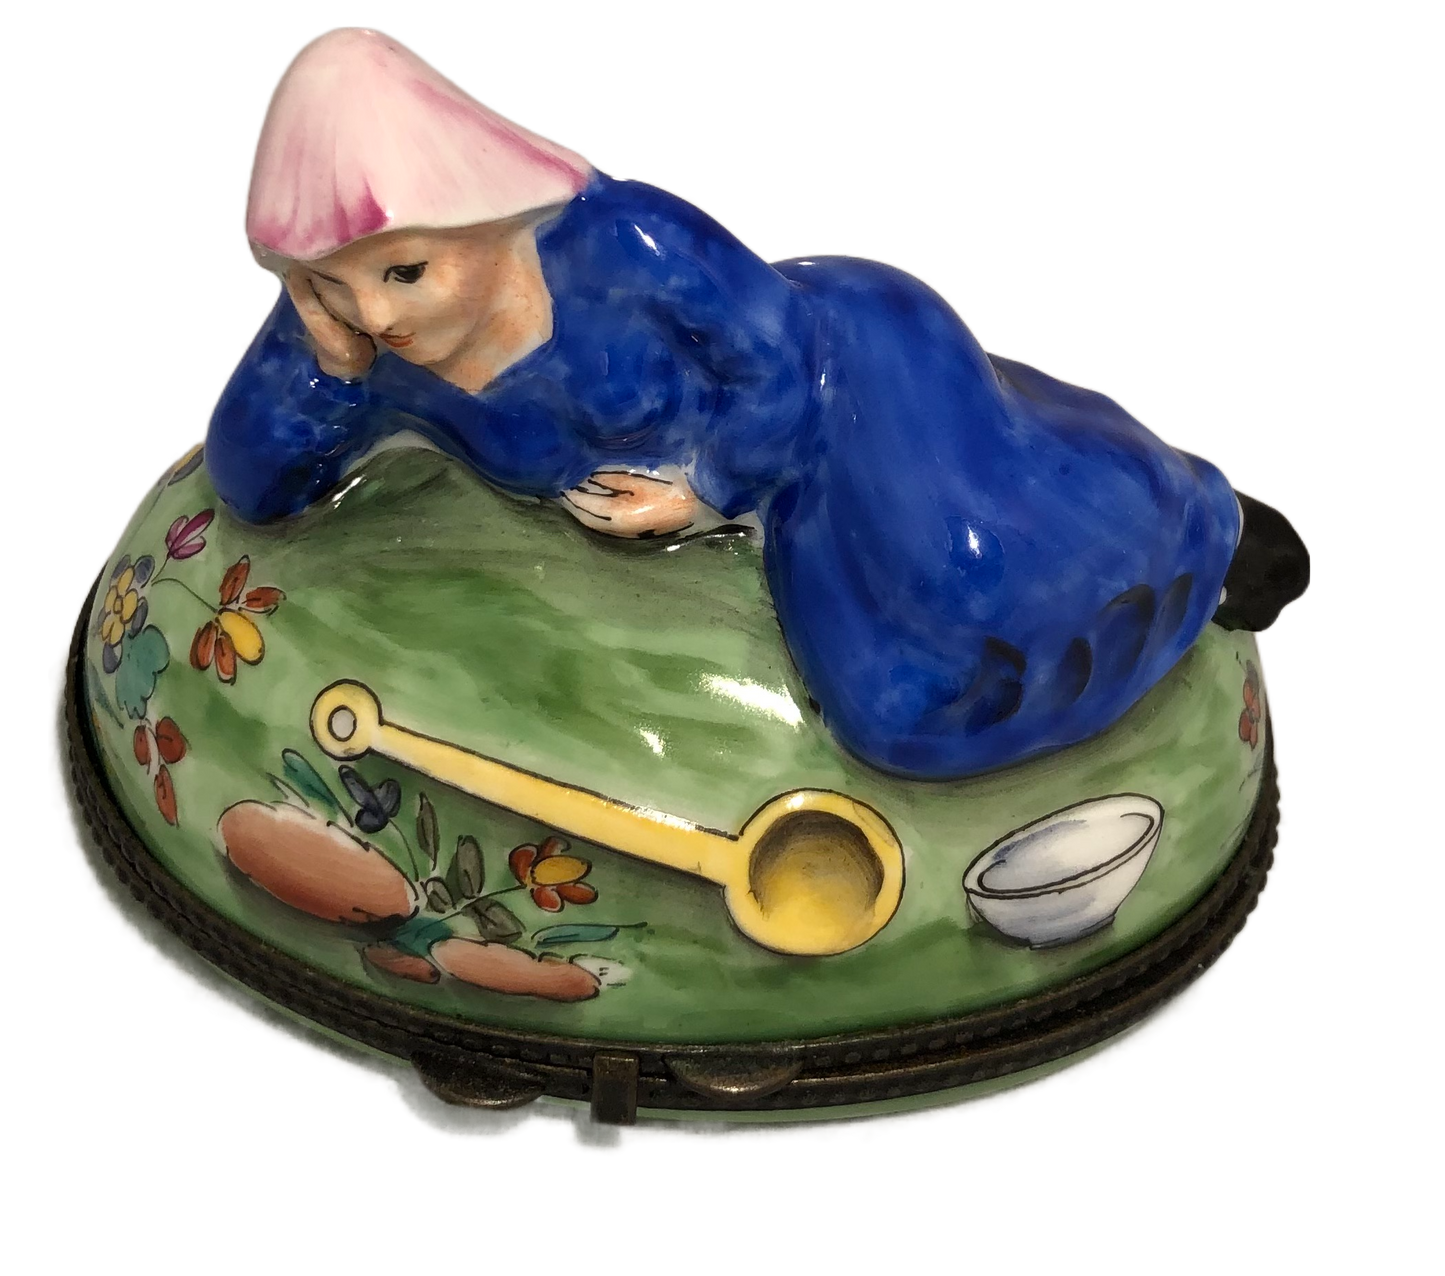 Whimsical Serenity: Hand-Painted Limoges Box with Lady in Blue Dress and Golden Ladle